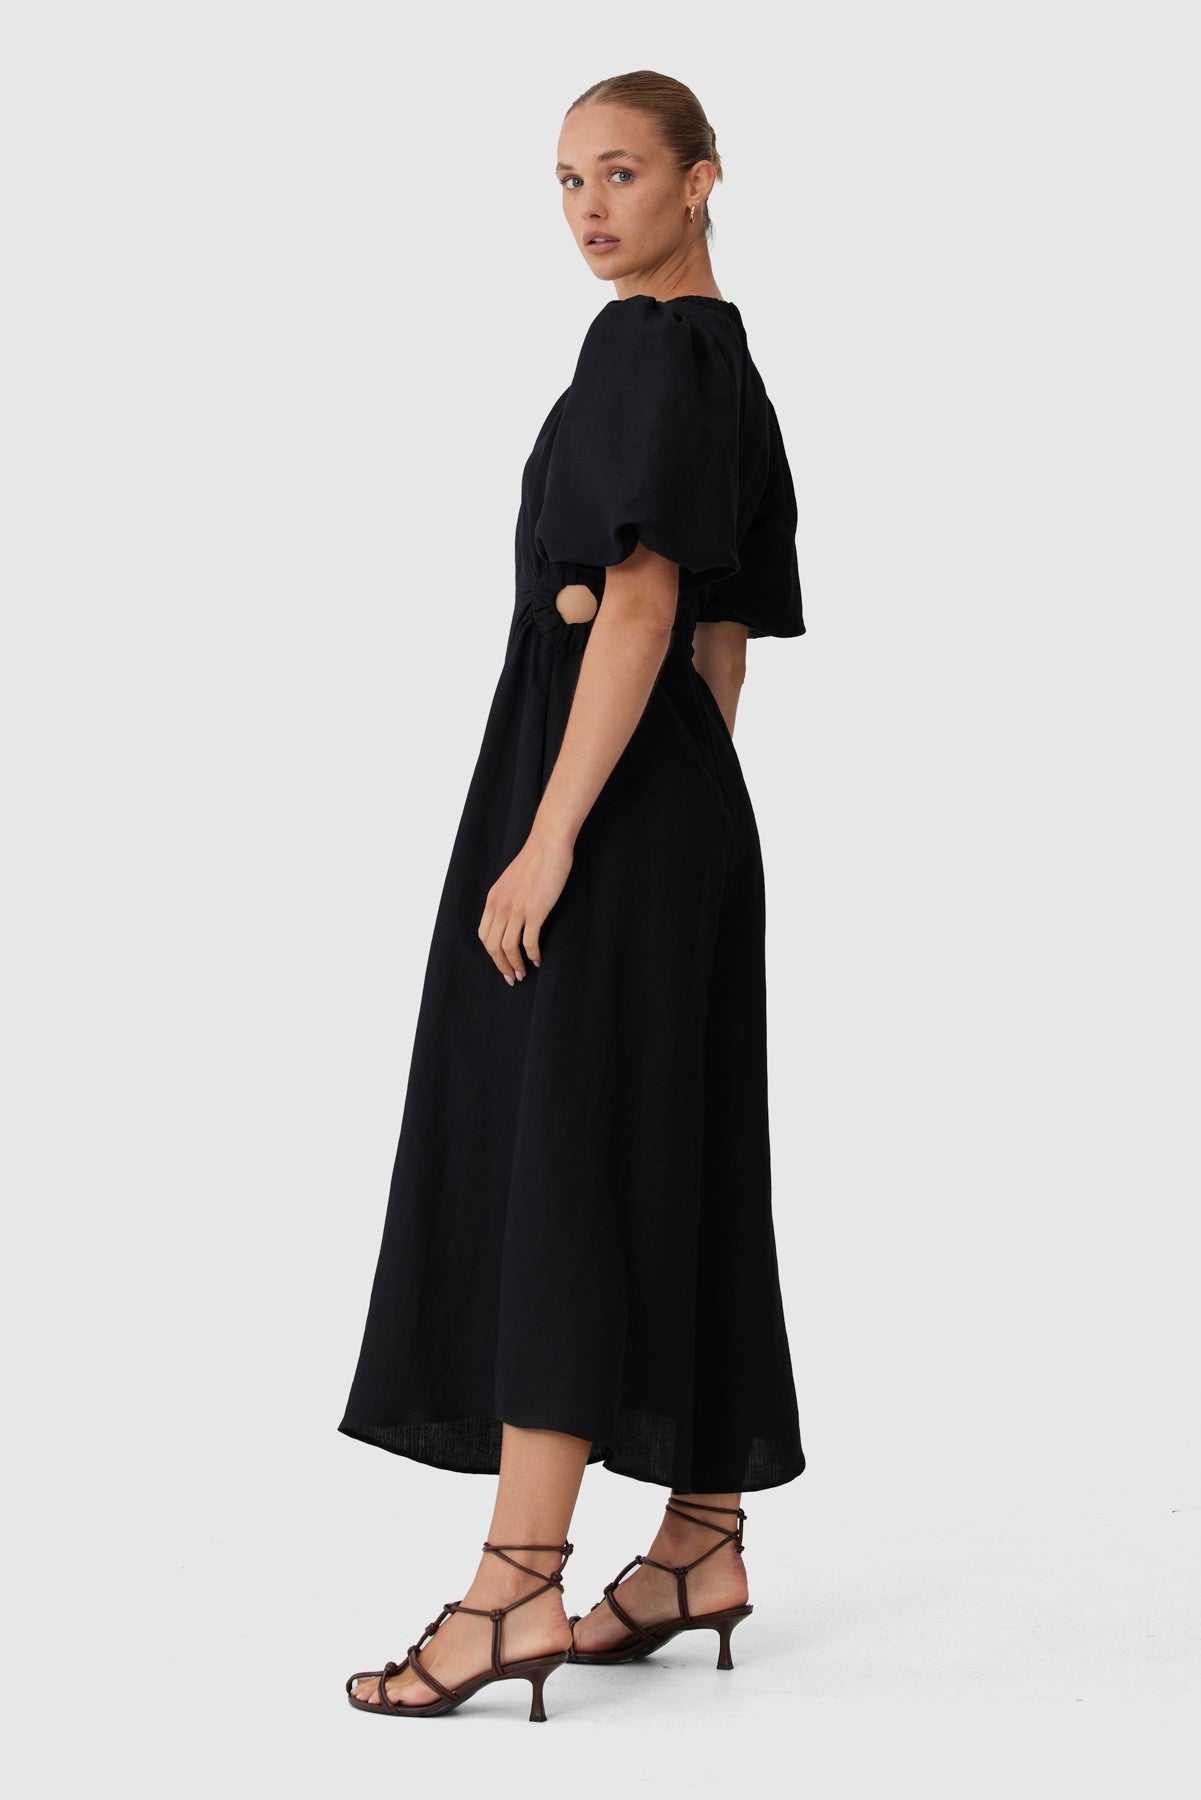 C/MEO Collective - Now And Forever Dress - Black